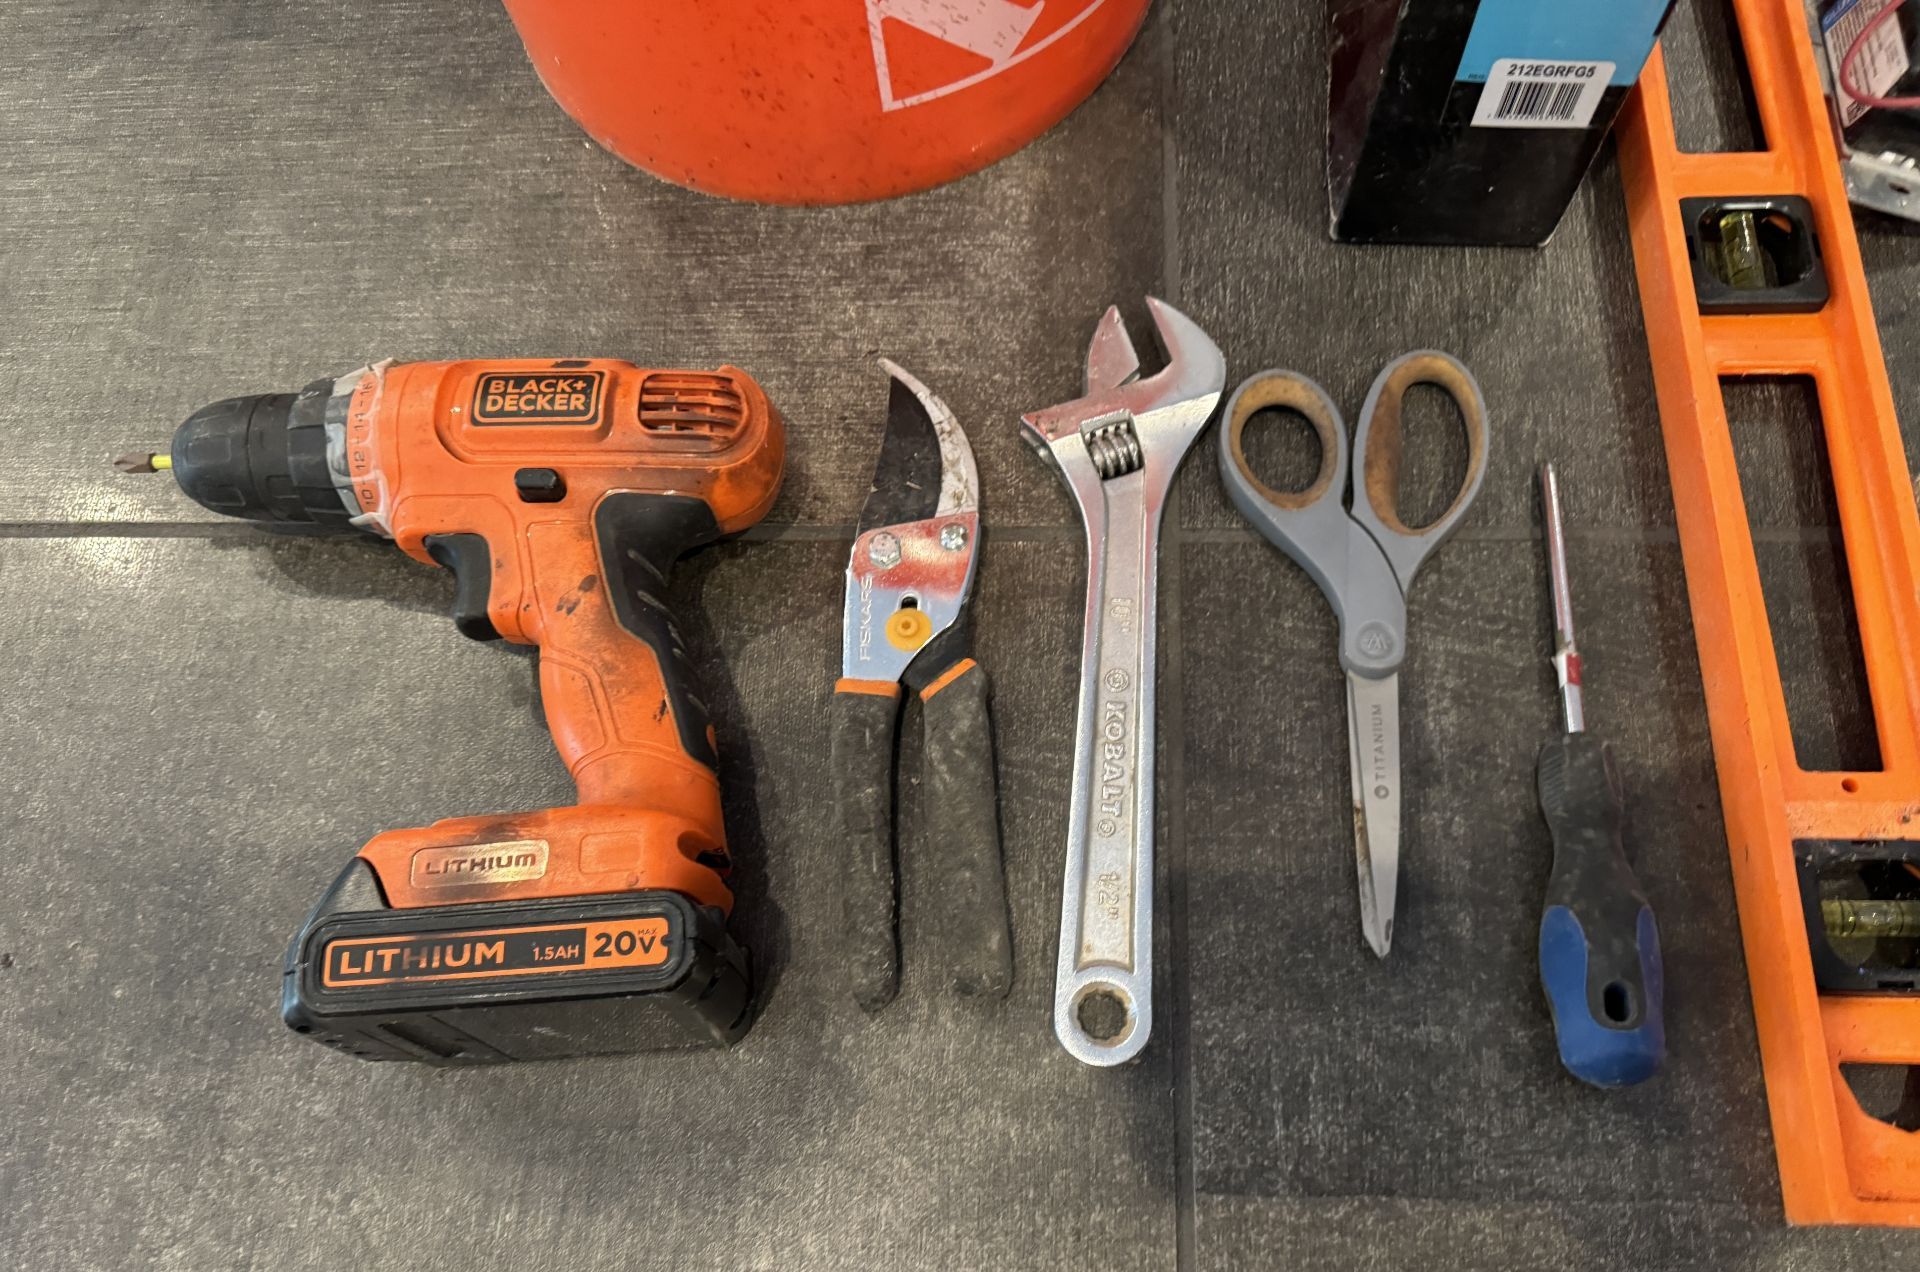 LOT OF TOOLS / HARDWARE ITEMS - Image 2 of 3